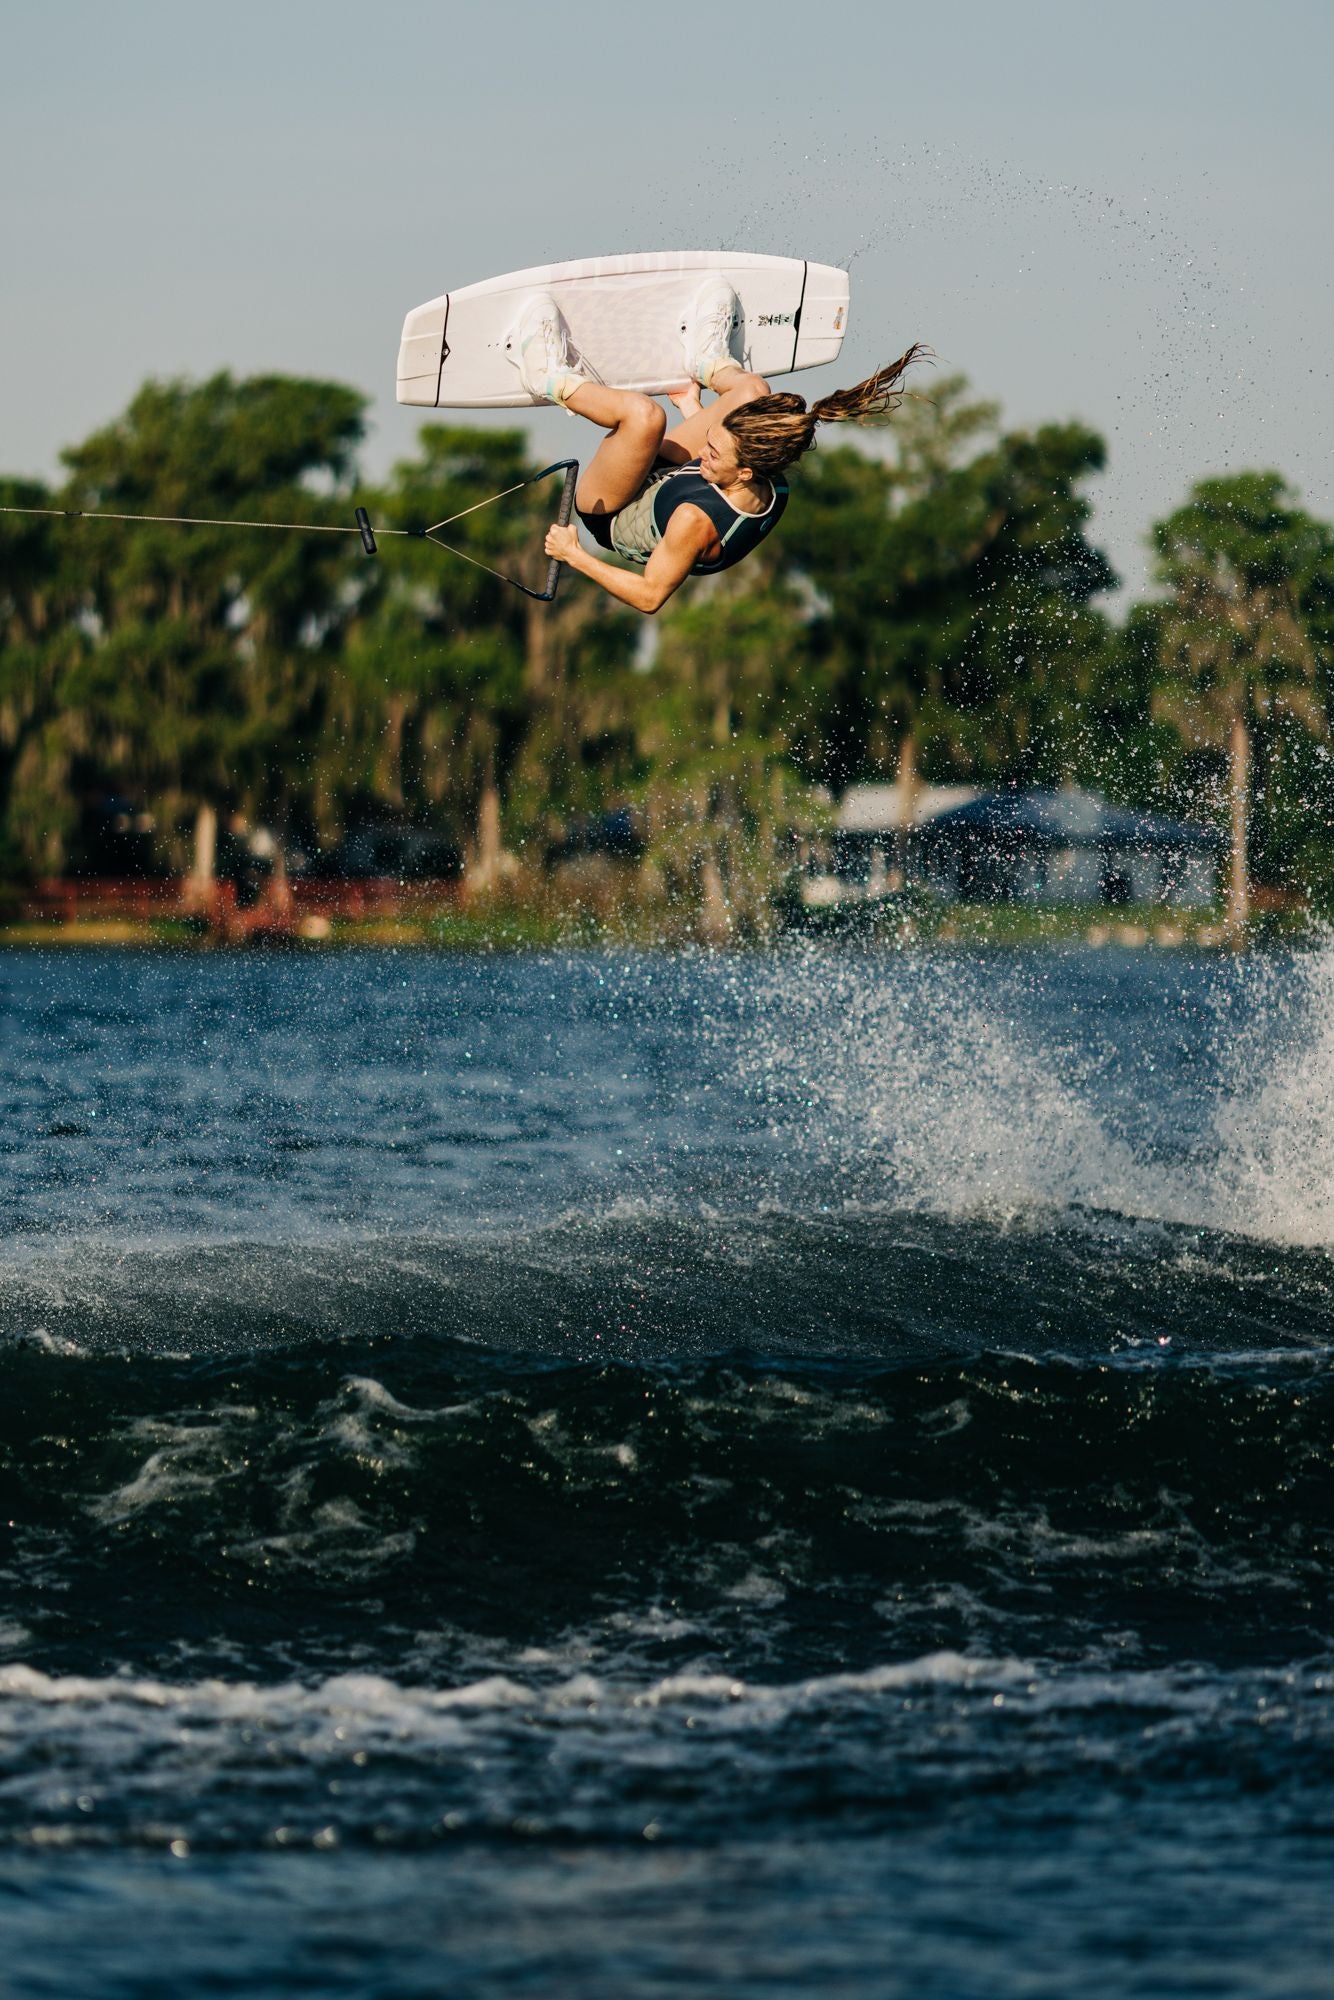 Product Description: Experience the thrill of a woman effortlessly gliding through the air on a Liquid Force 2024 M.E. Wakeboard. Our Liquid Force wakeboarding experience offers an exhilarating blend of excitement and freedom, providing an unforgettable adventure for adrenaline junkies.